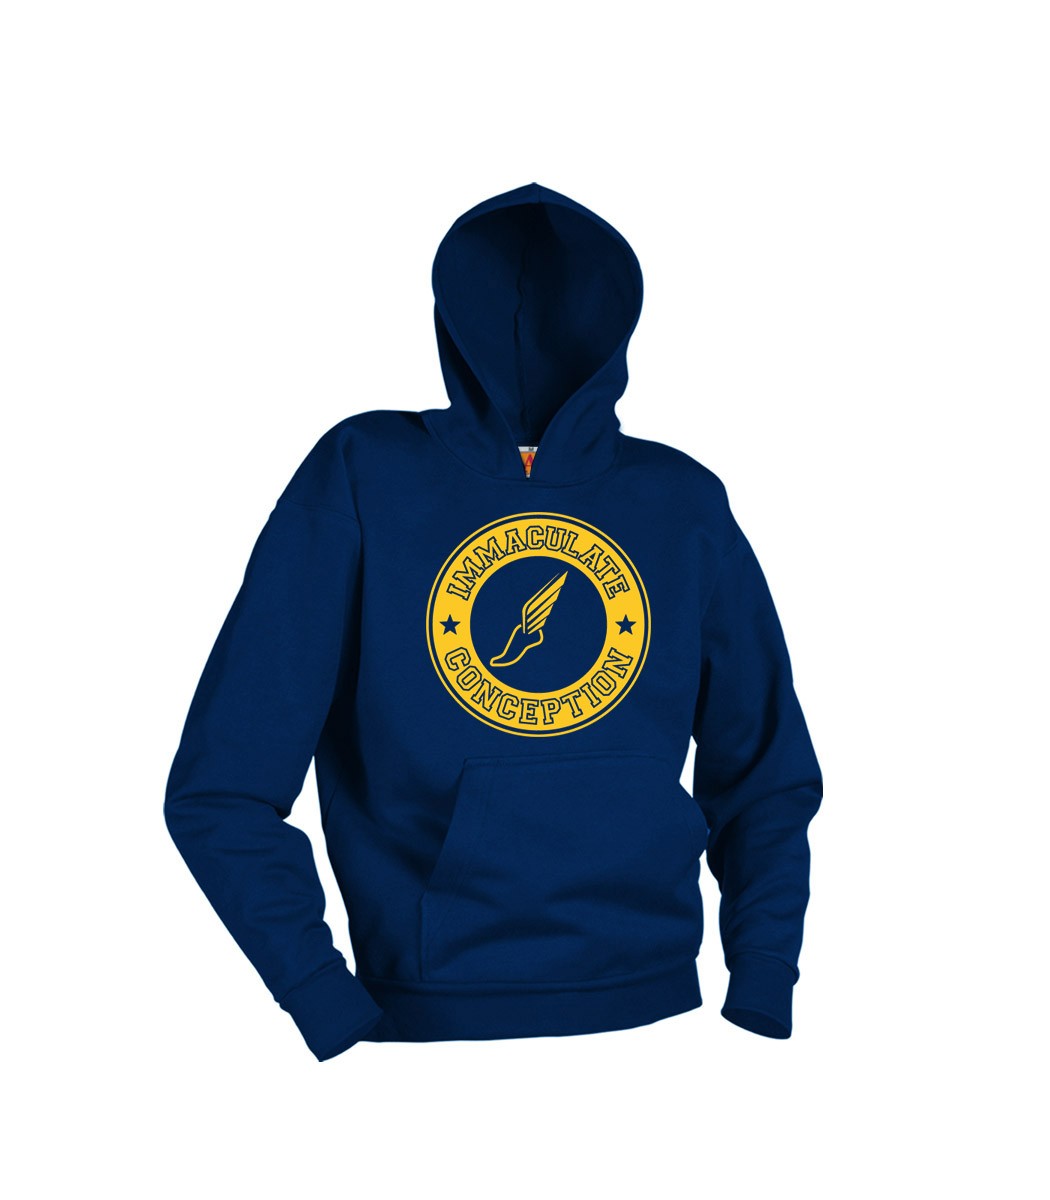 Team ICS Track Hoodie w/ Track Logo & Name Customization - Please Allow 2-3 Weeks for Delivery